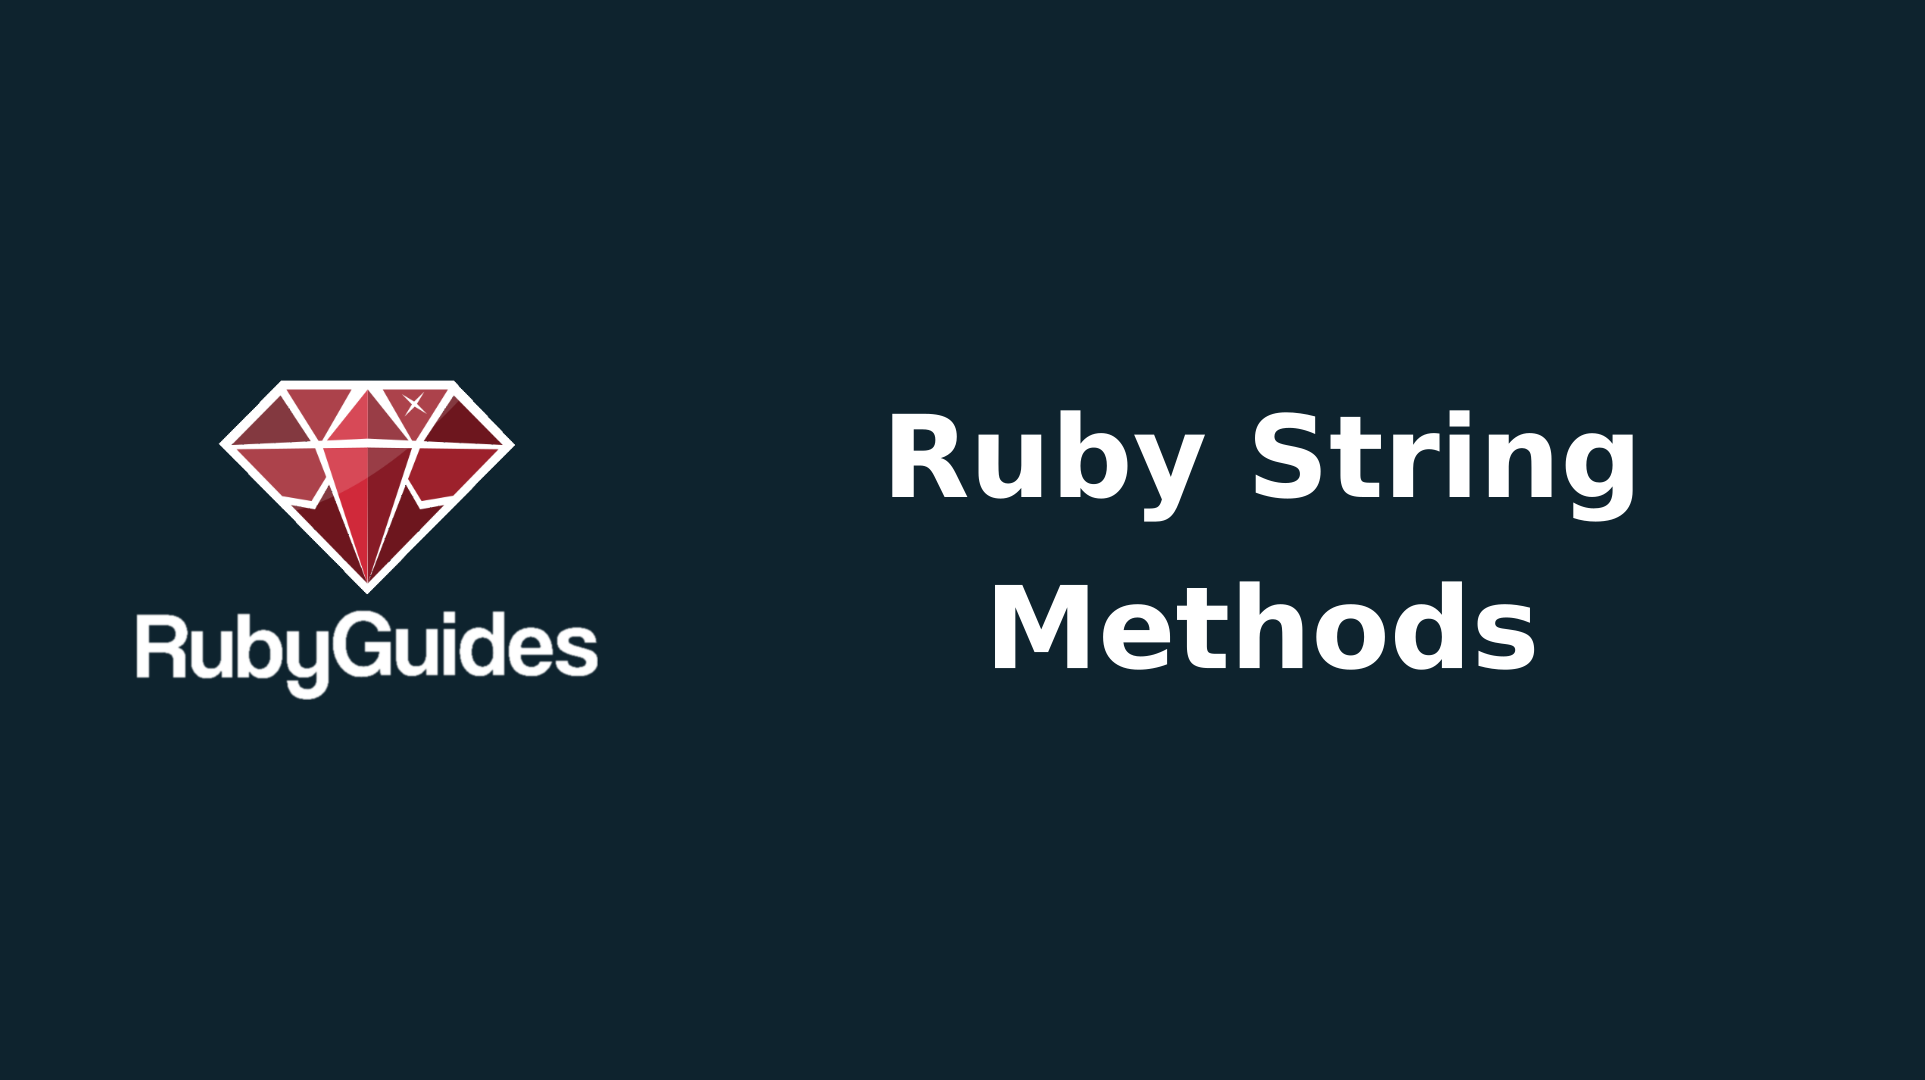 Str methods. String methods. Ruby String blank. Ruby doc. Ruby remove Double Spaces from String.